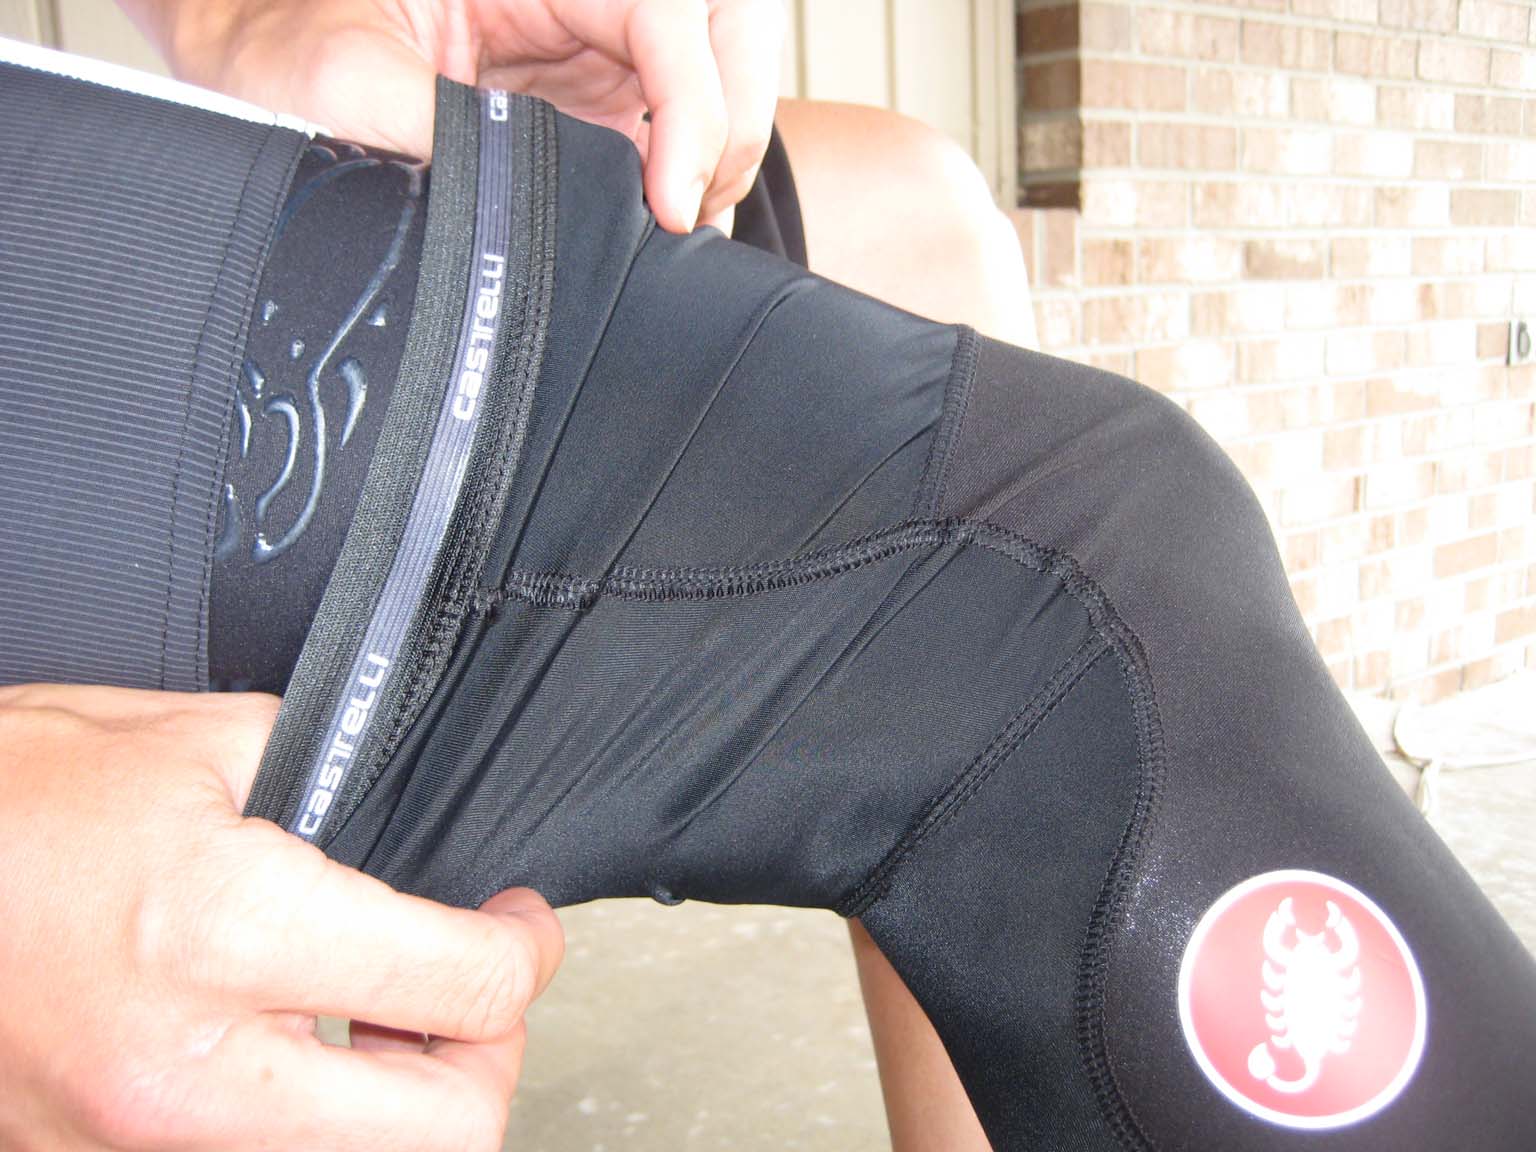 Grippers on both the outside and inside of the knee warmers held things in place.  The seam directly behind the knee can feel odd if not placed correctly on your anatomy.